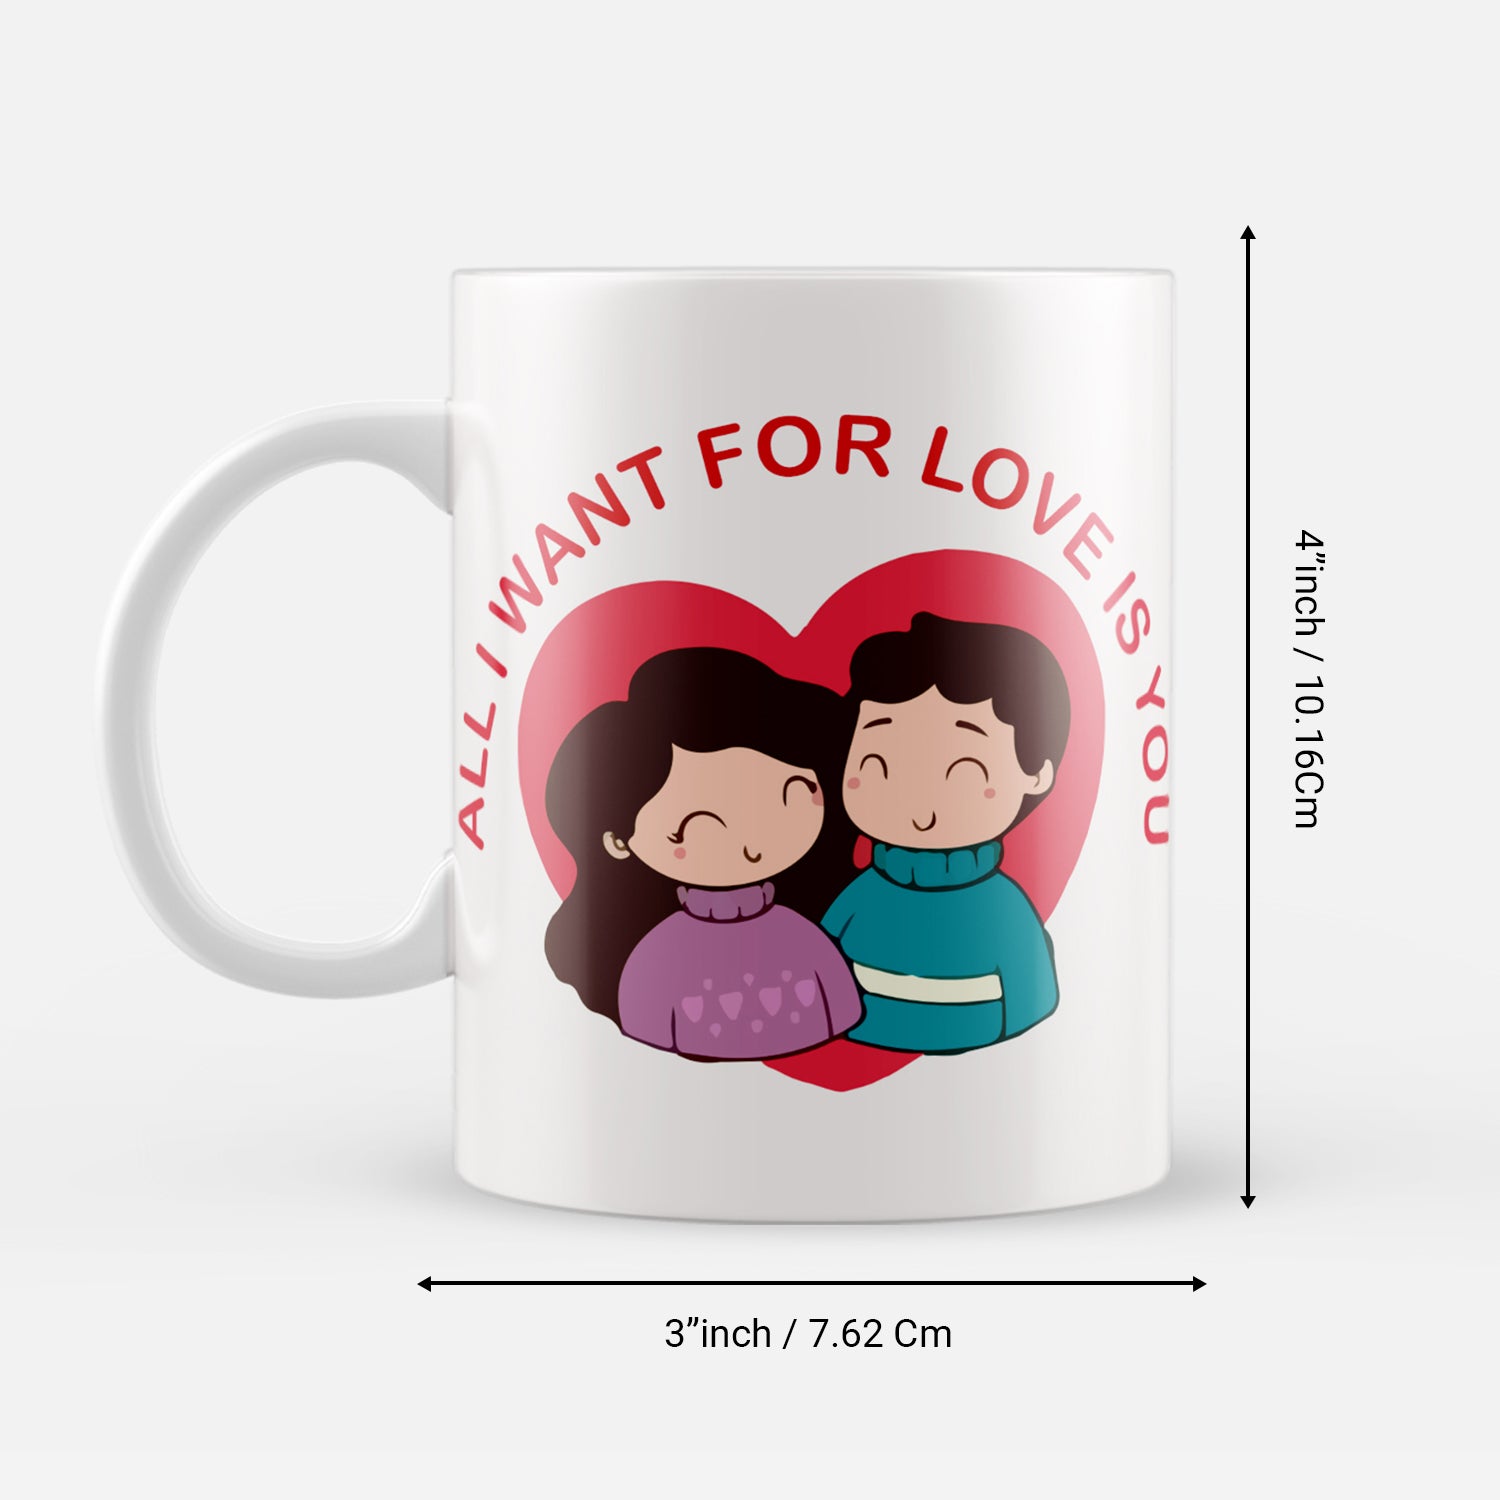 "All I want for Love is you" Valentine Love theme Ceramic Coffee Mug 3